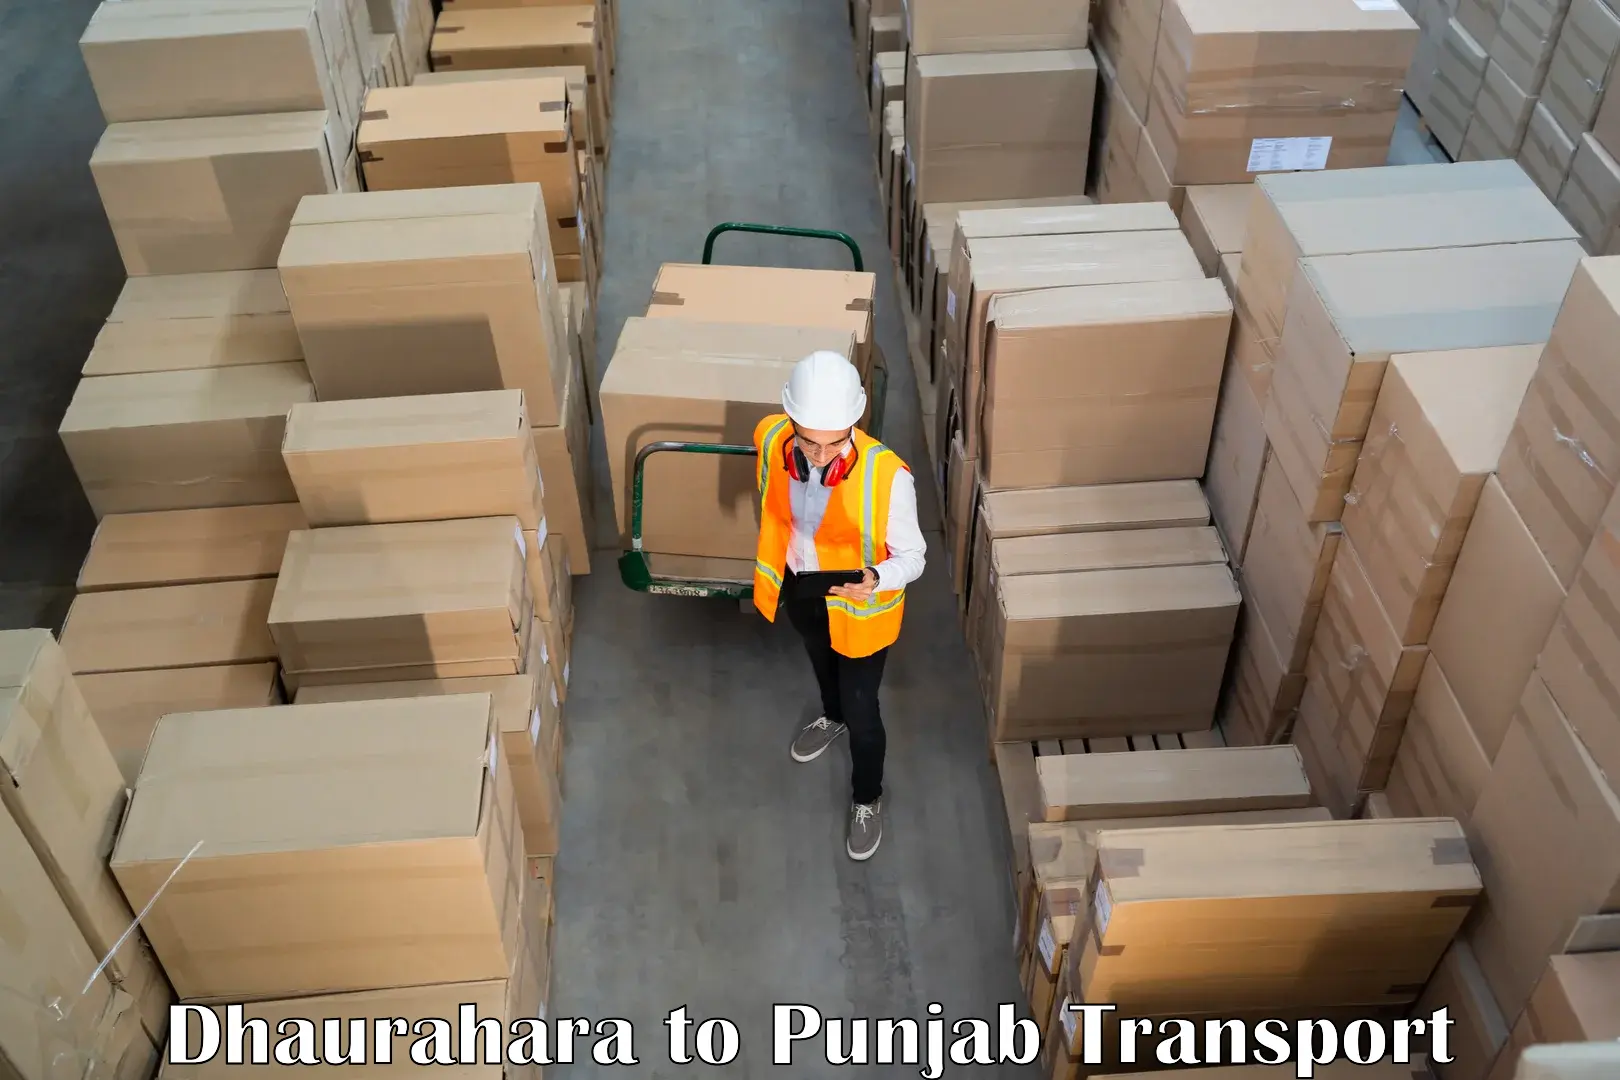 Air freight transport services Dhaurahara to Moga